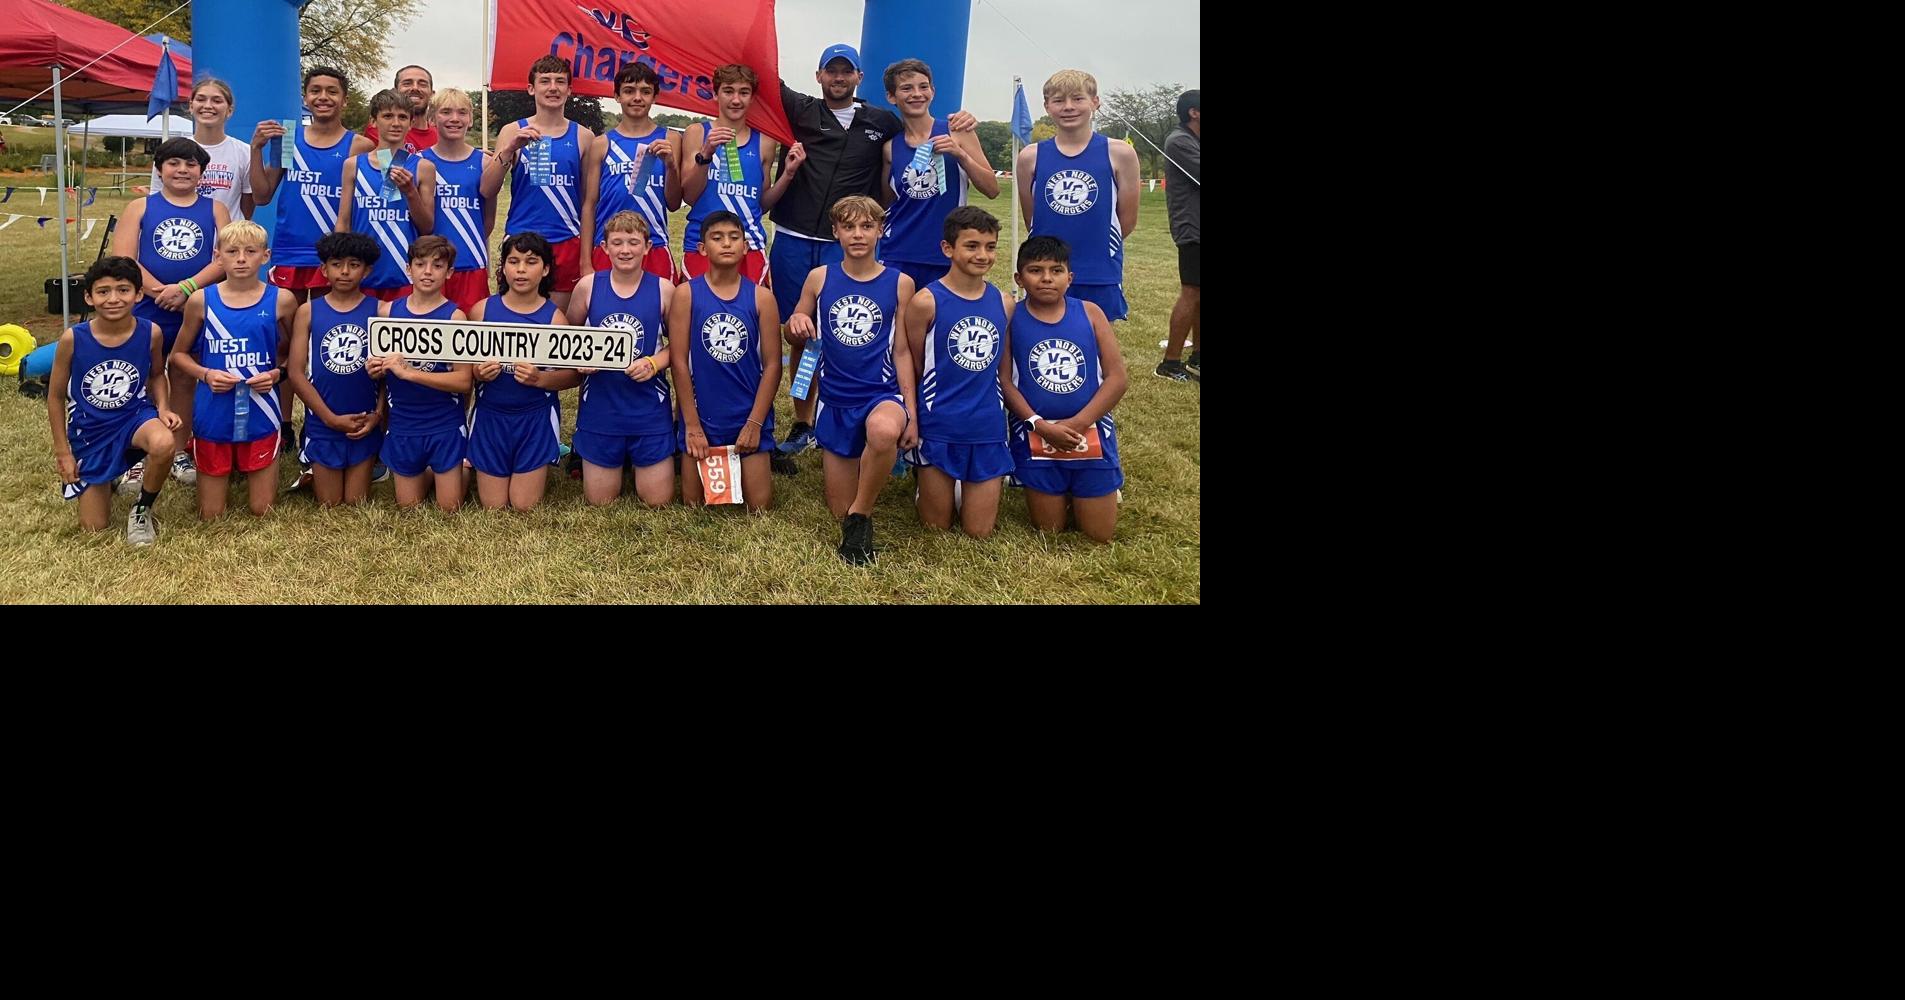 West Noble sweeps Jr. NECC cross country titles, Eveningstar